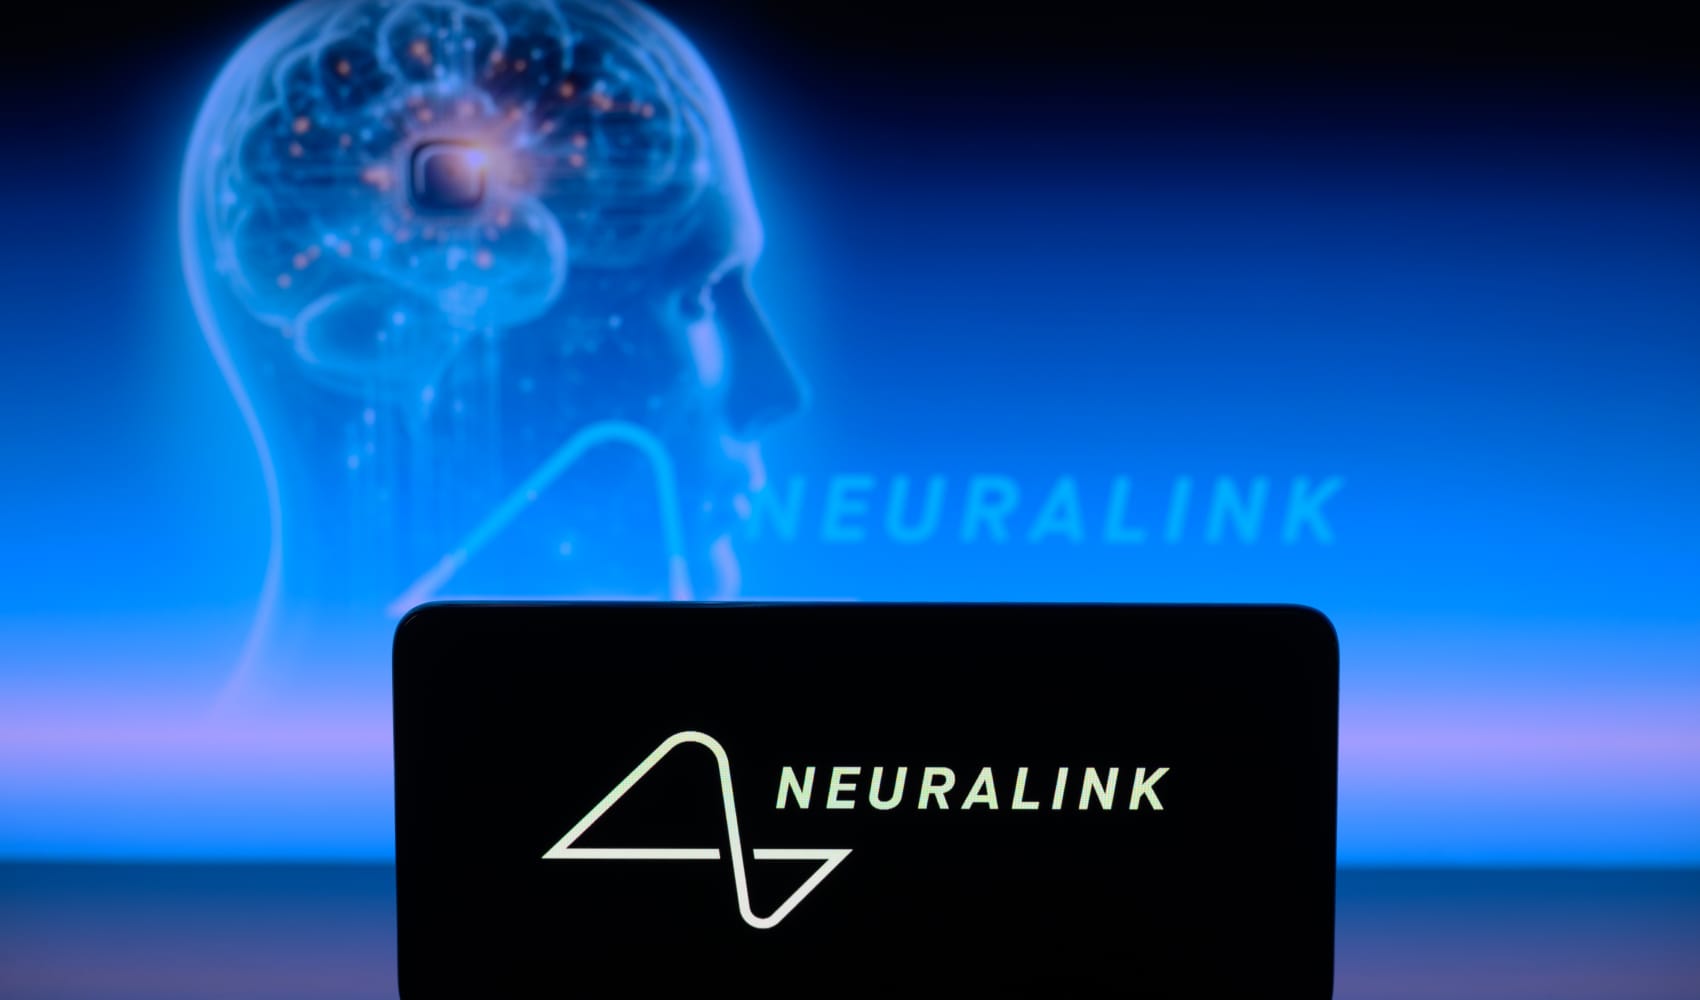 Neuralink shares video of patient playing chess using signals from
brain implant